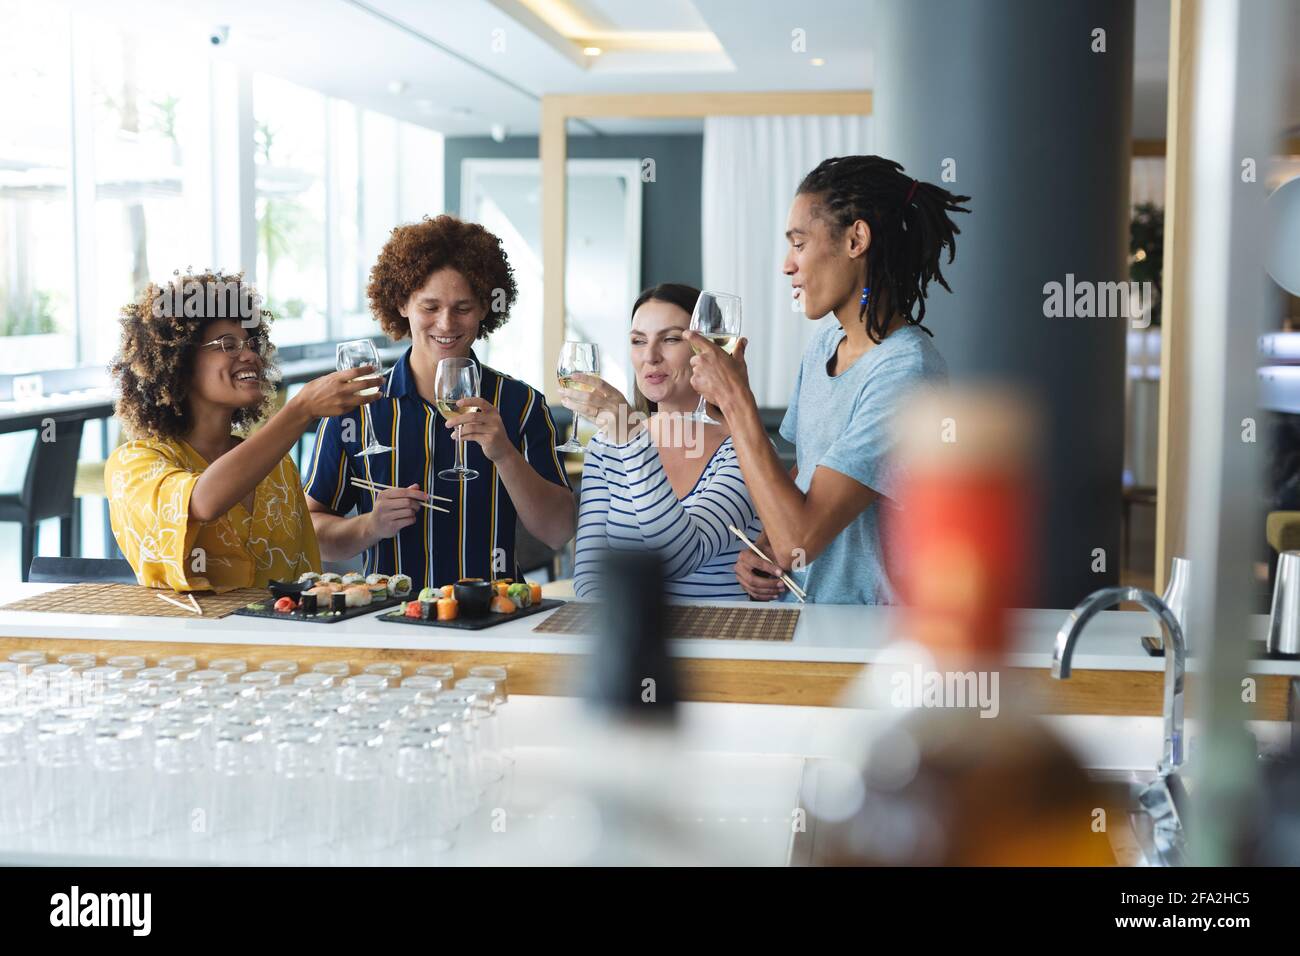 Diverse group of male and female colleagues raising glasses of wine at bar Stock Photo